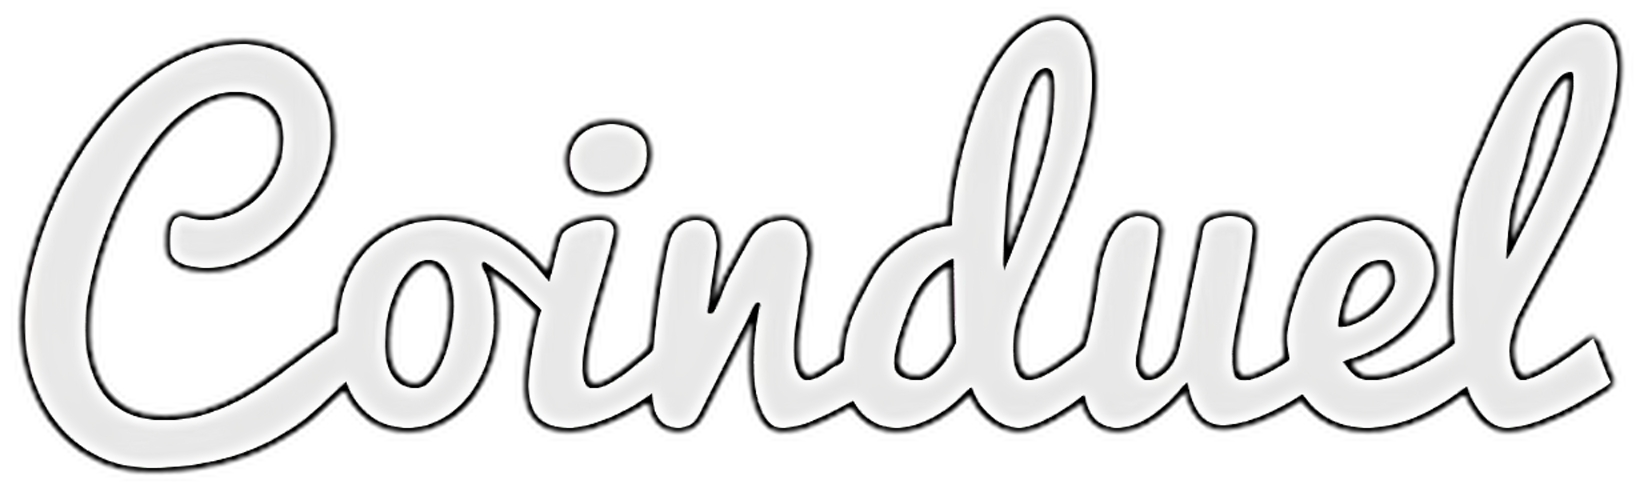 Coinduel's logo, a stylized image of the word Coinduel